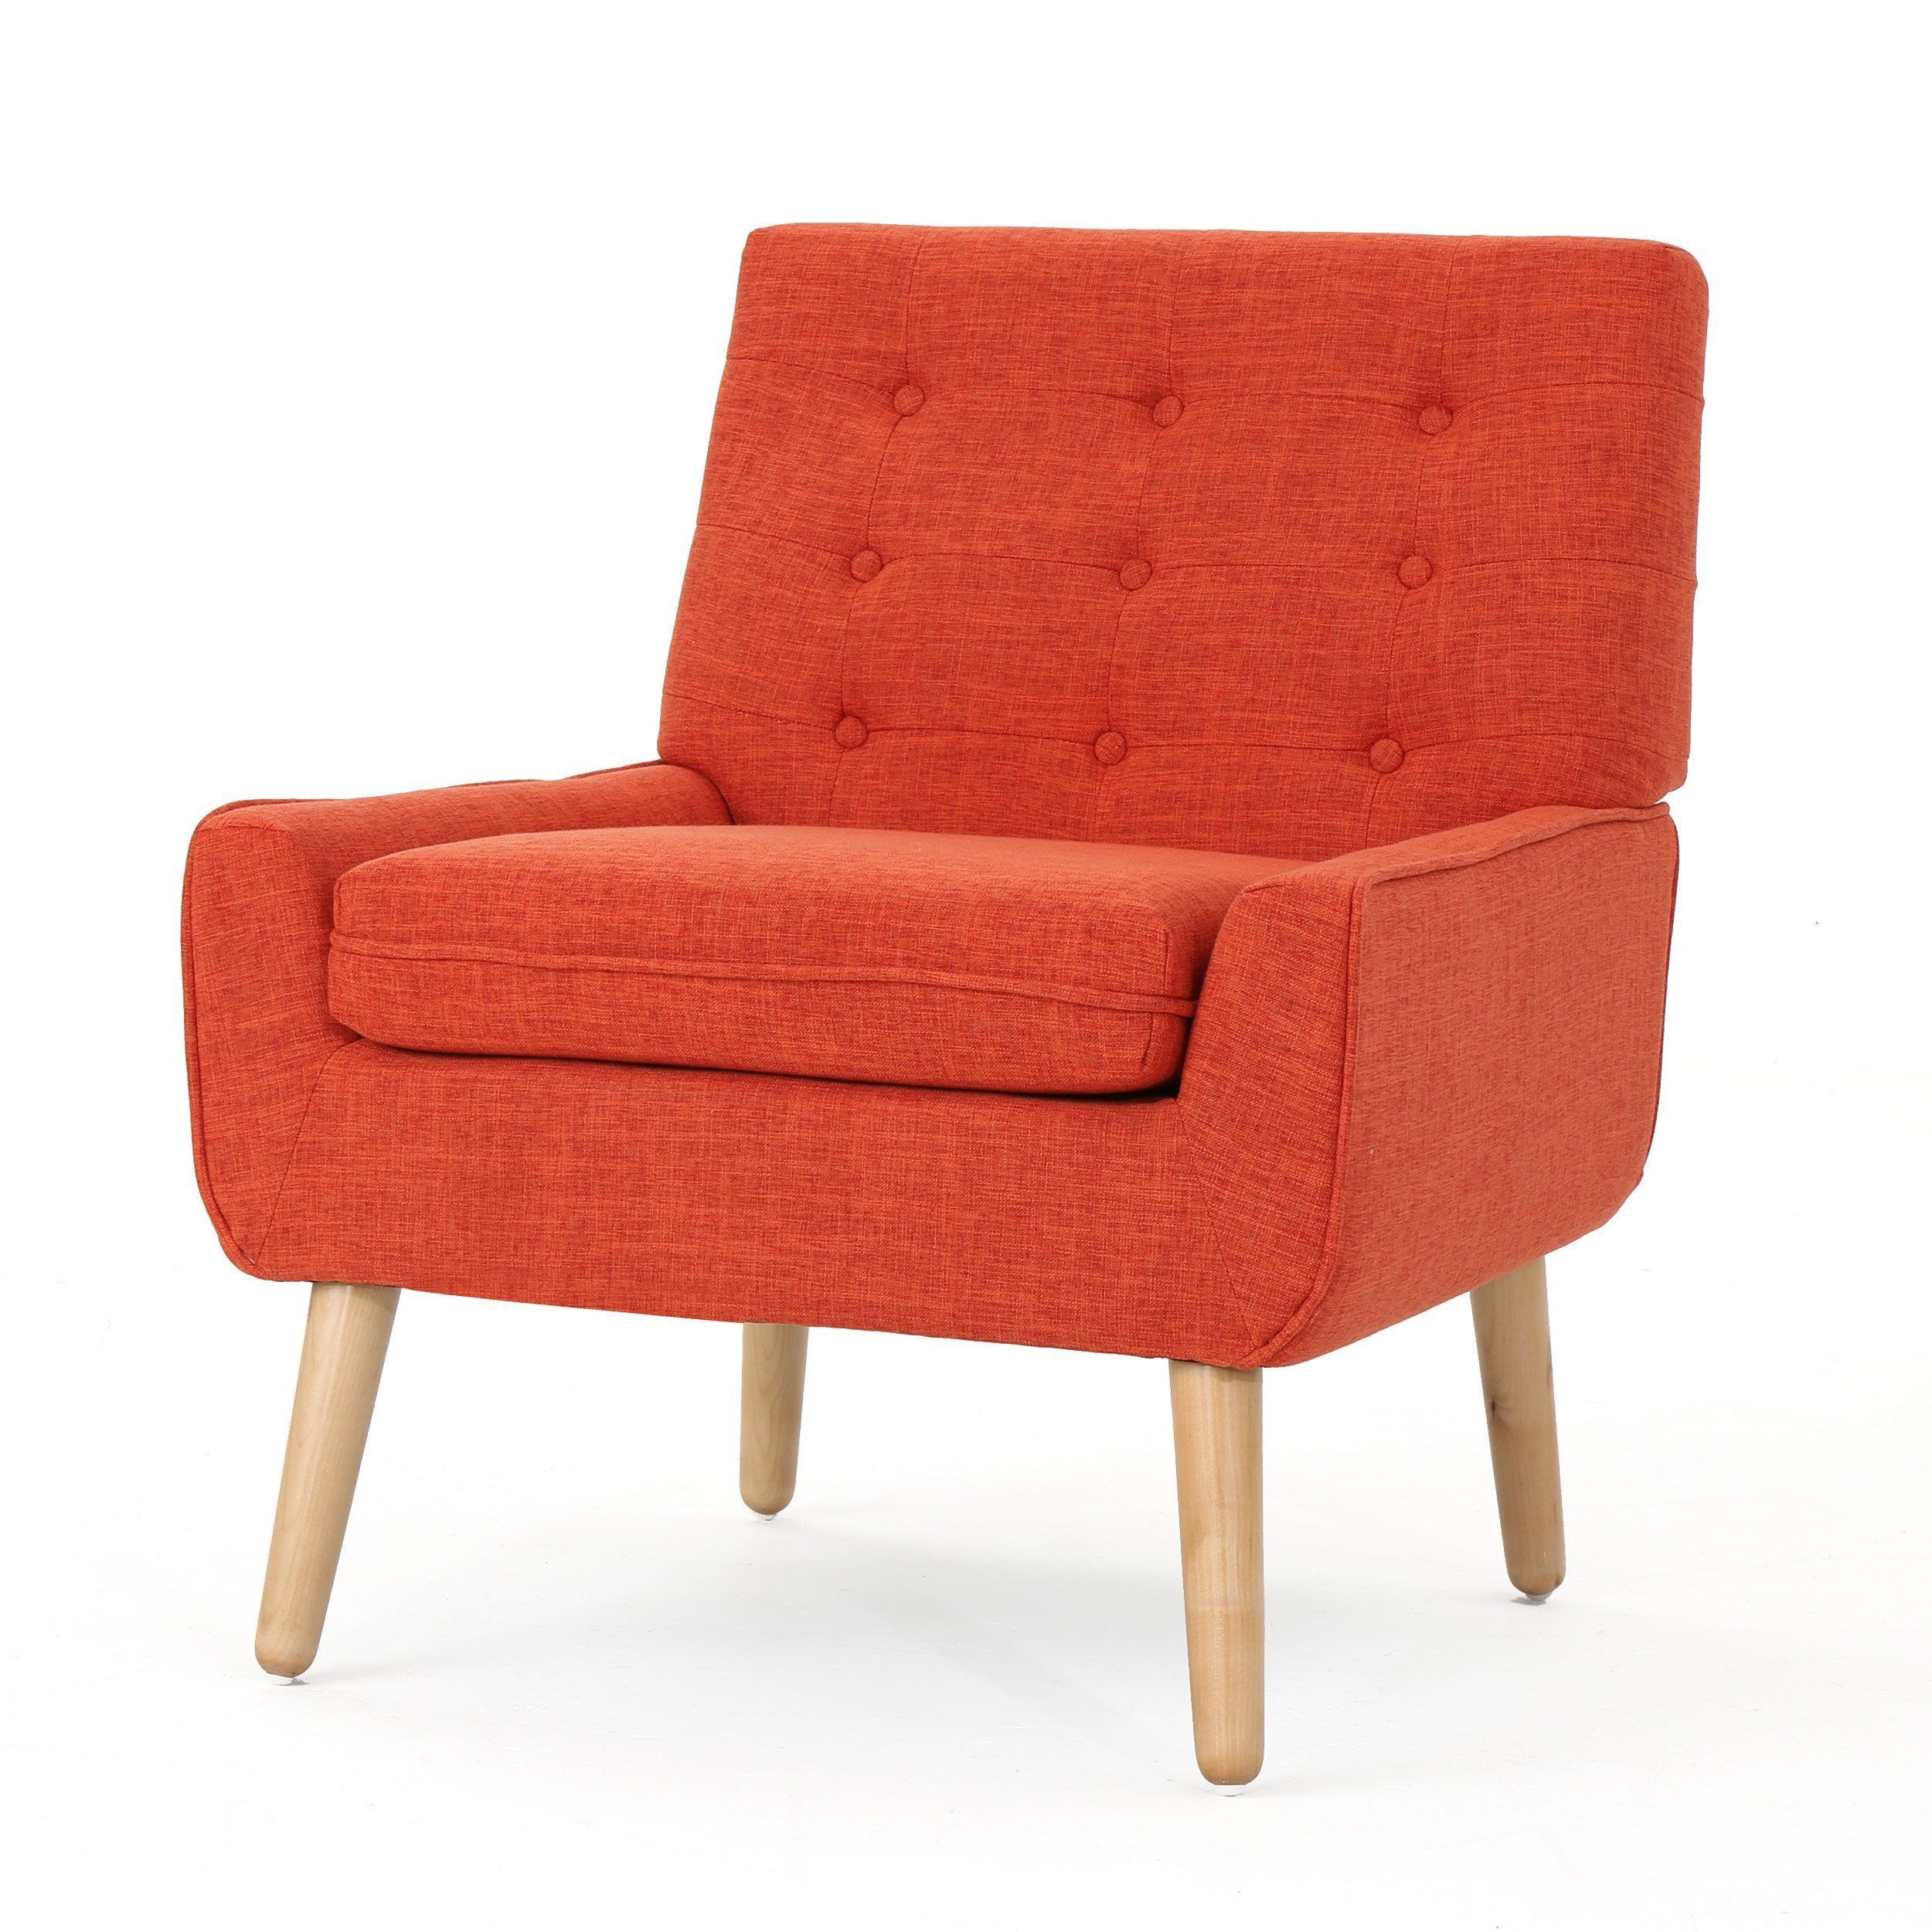 Eonna Mid Century Modern Button Tufted Fabric Upholstered Accent Chair With Regard To Orange Fabric Nail Button Square Ottomans (Gallery 19 of 20)